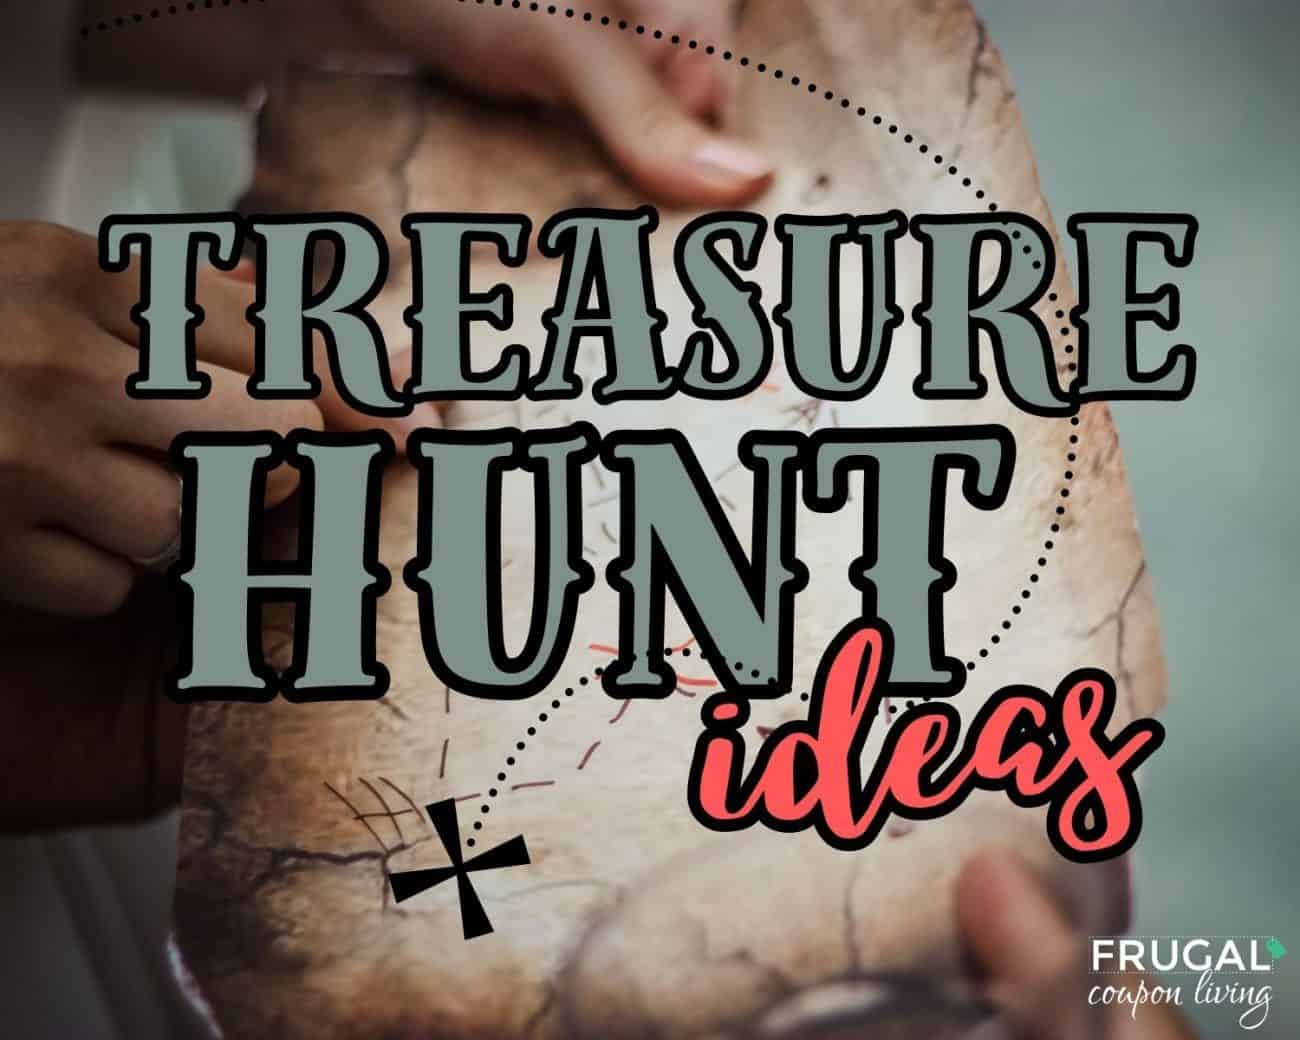 ideas for treasure hunts for adults and kids